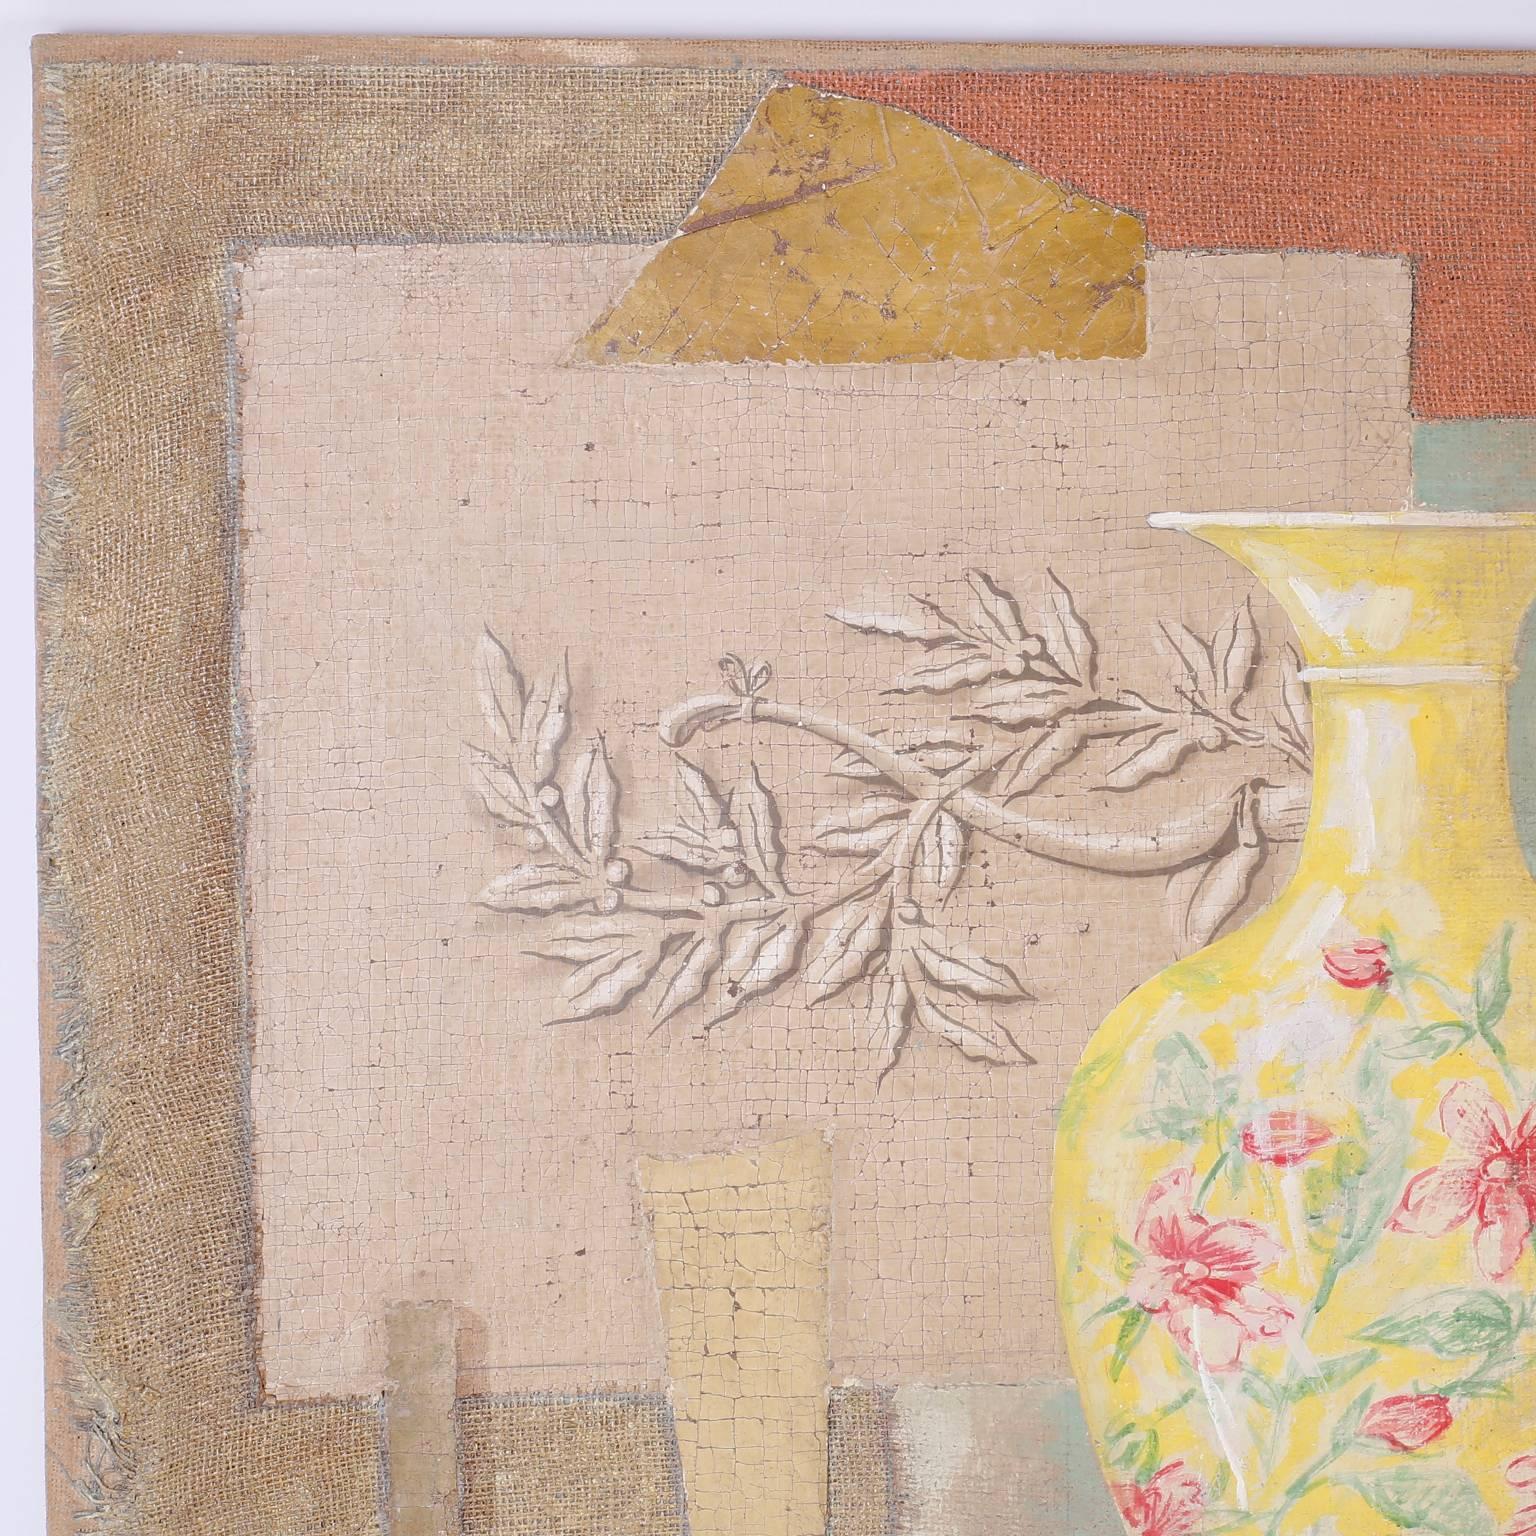 Oil painting and collage on burlap having a still life composition of two Chinese vases and a deconstructed interior with a warm silent ambiance. Signed Jacques Lamy in the lower right.